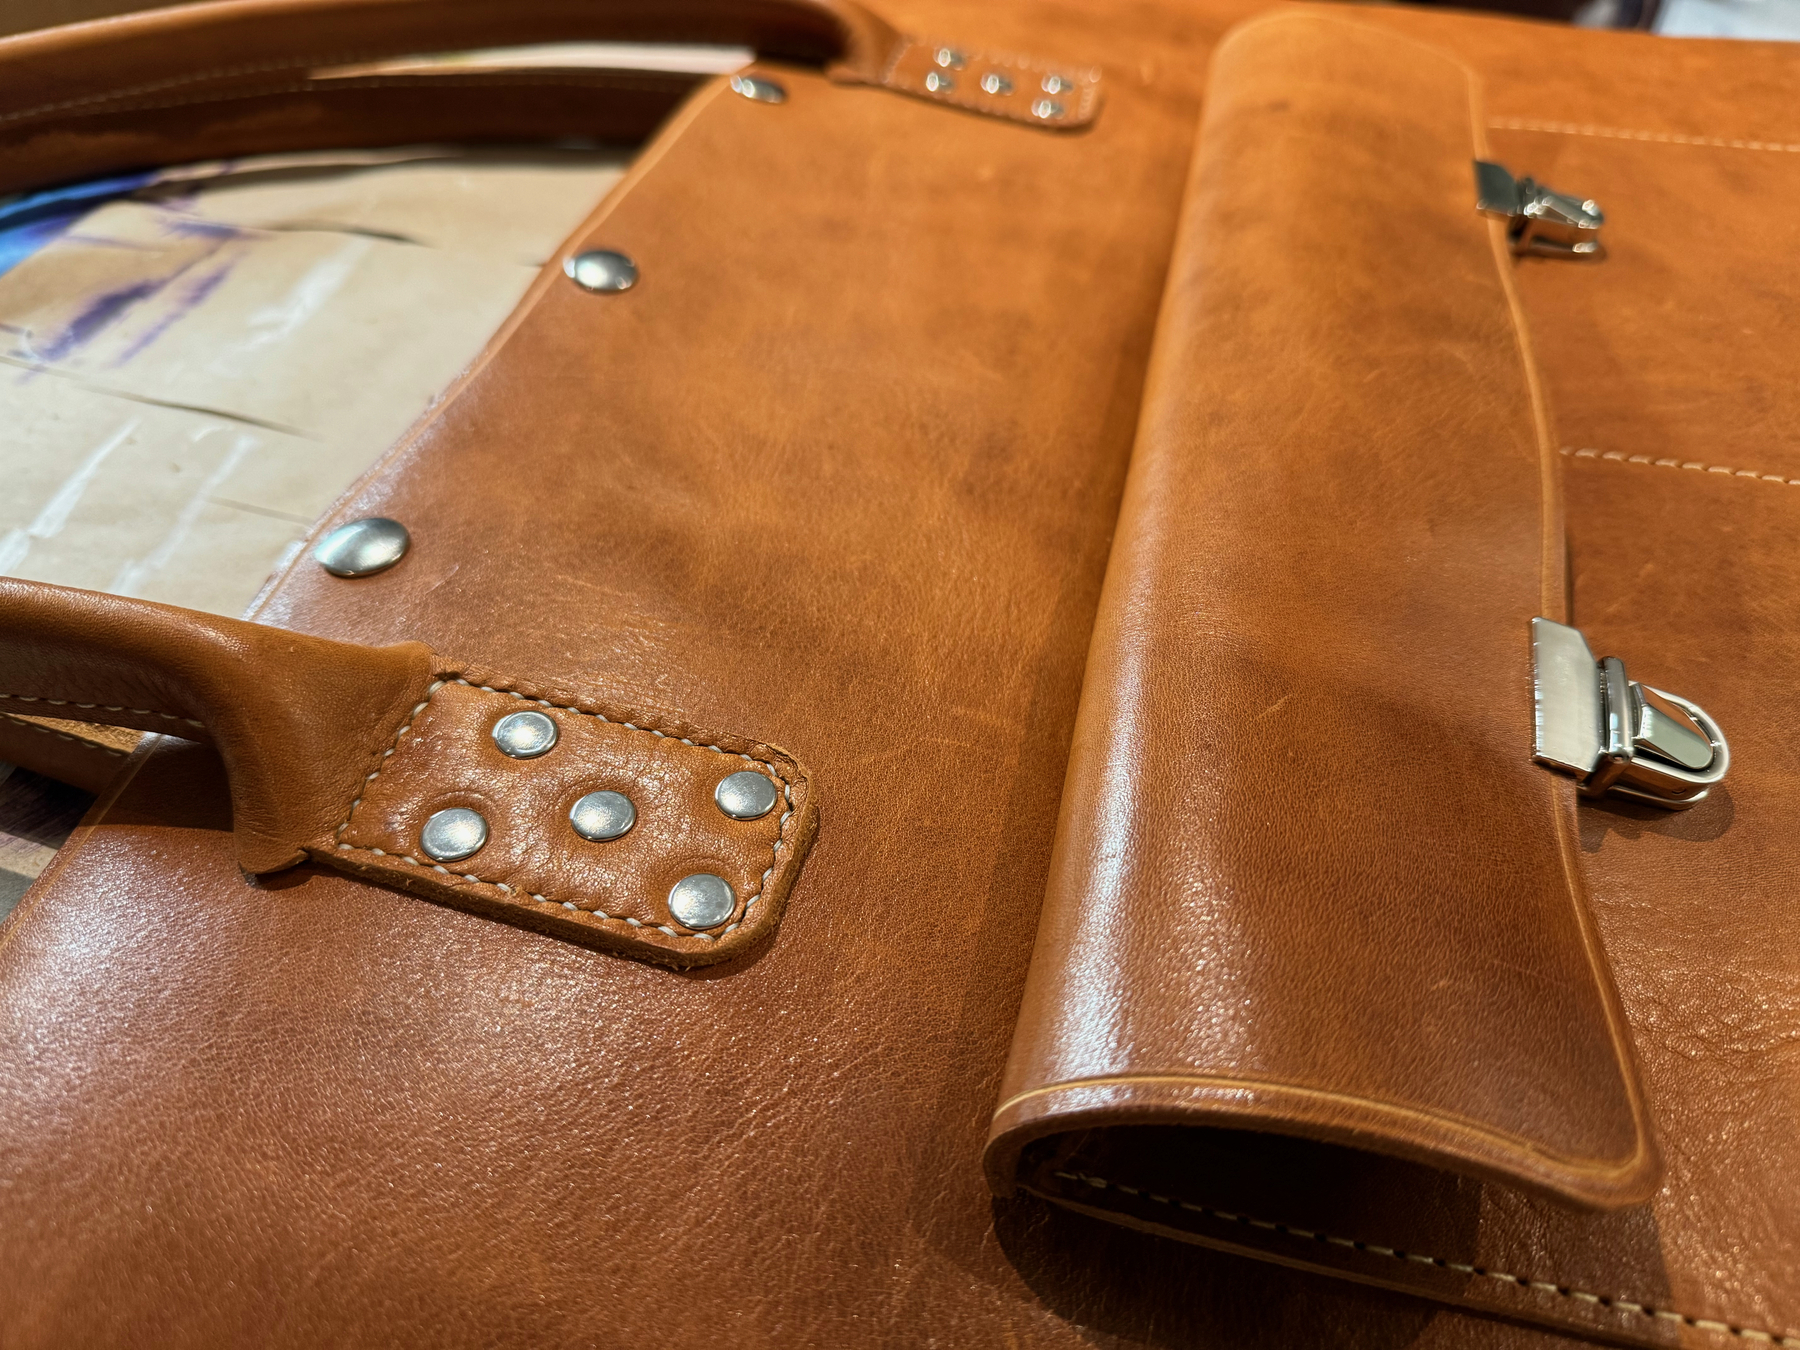 A close-up view of a brown leather bag showcases its smooth texture, metallic rivets, and buckles.